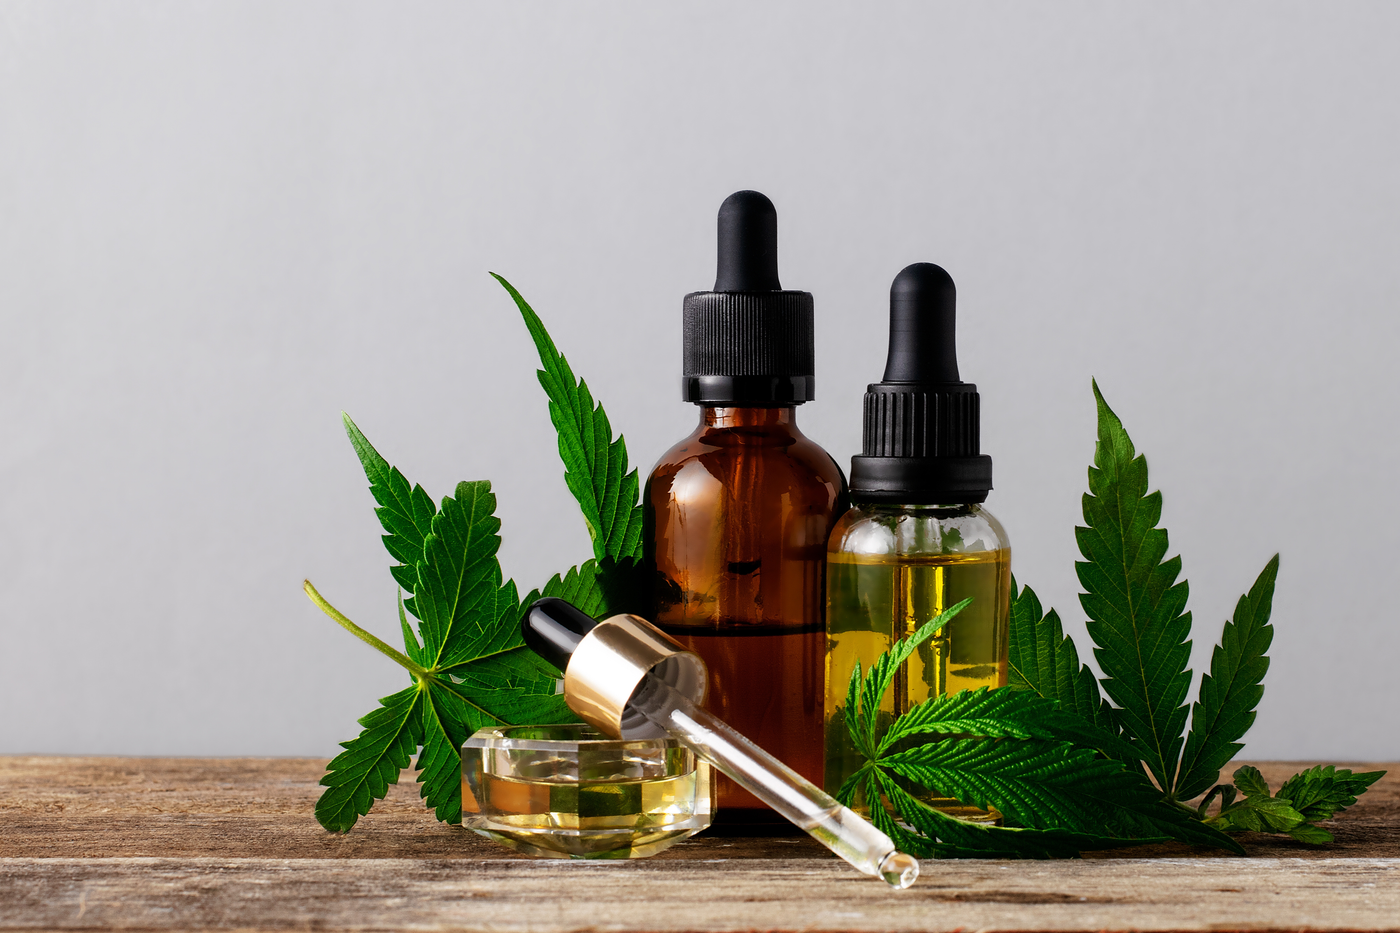 Our CBD oil is made with quality in mind. We source all of our oil from out certified organic hemp farm located in Wisconsin. Our farm is free from any pesticides or harmful chemicals that ensures you are getting the highest quality oil!